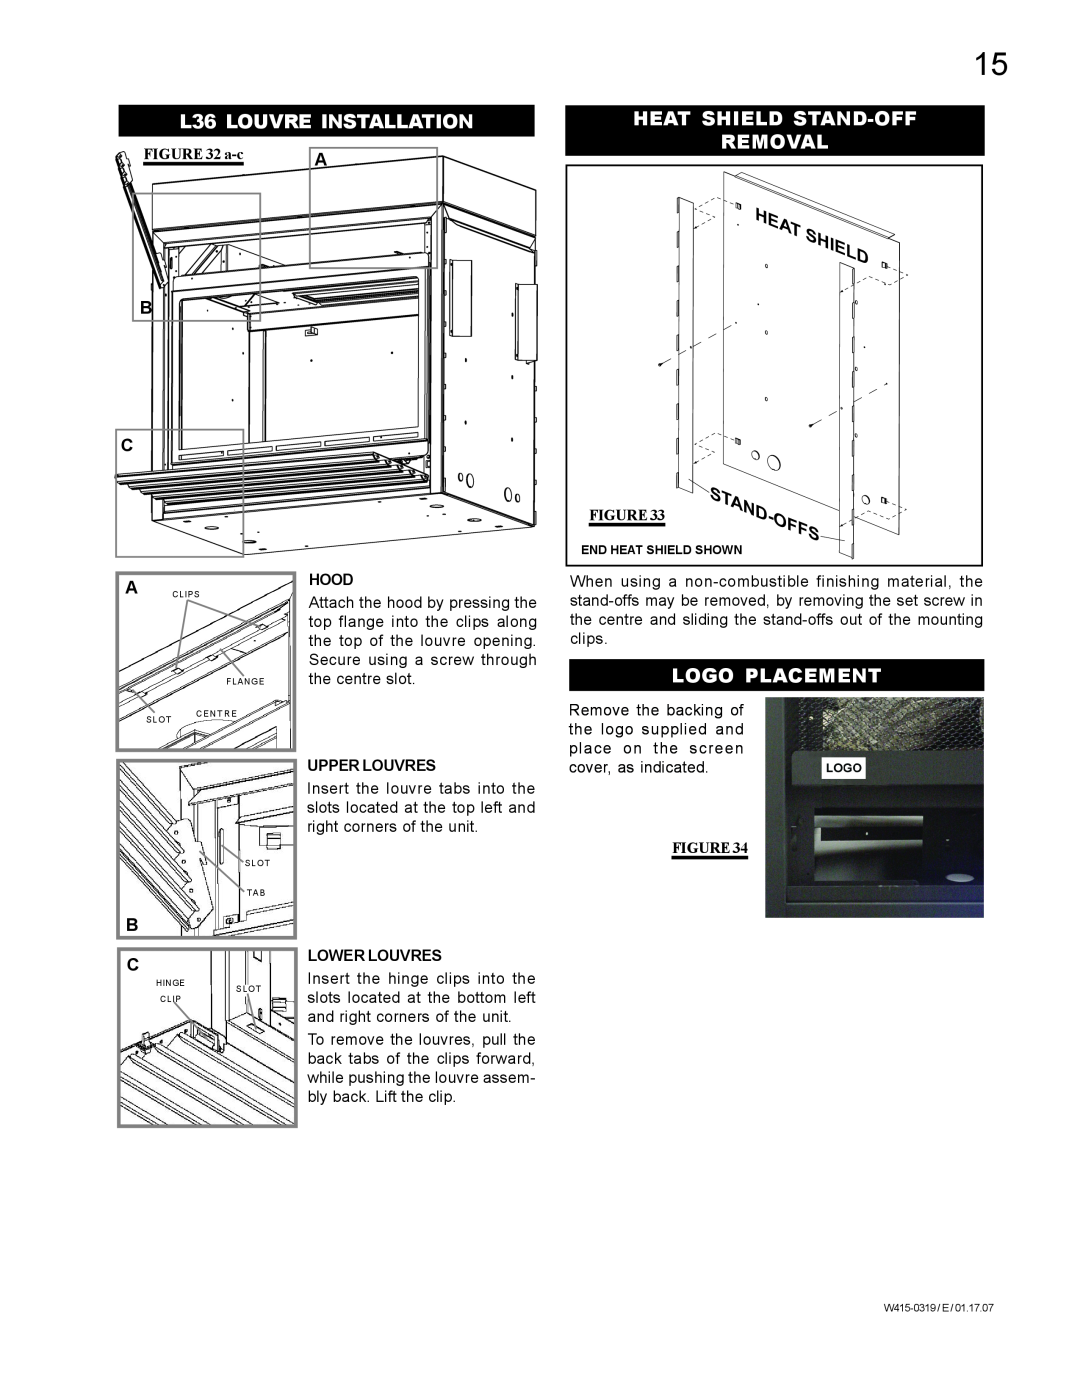 Napoleon Fireplaces fireplaces manual L36 LOUVRE INSTALLATION, Heat Shield Stand-Off Removal, Logo Placement, a-c, Hood 